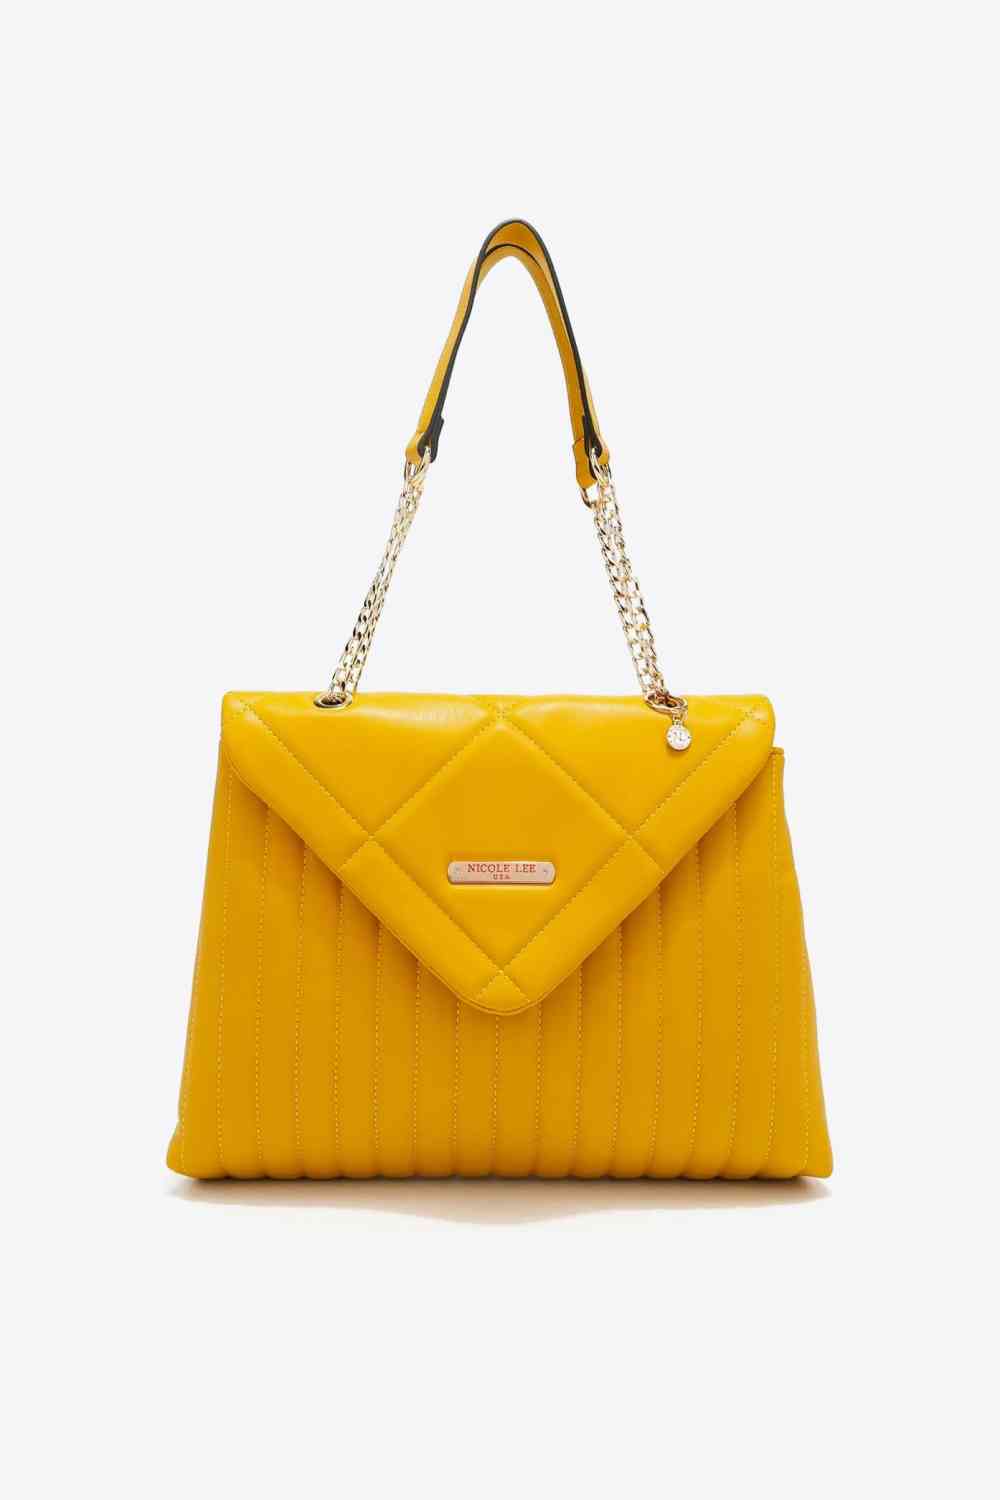 Nice Touch Handbag in Multiple Colors  Southern Soul Collectives 